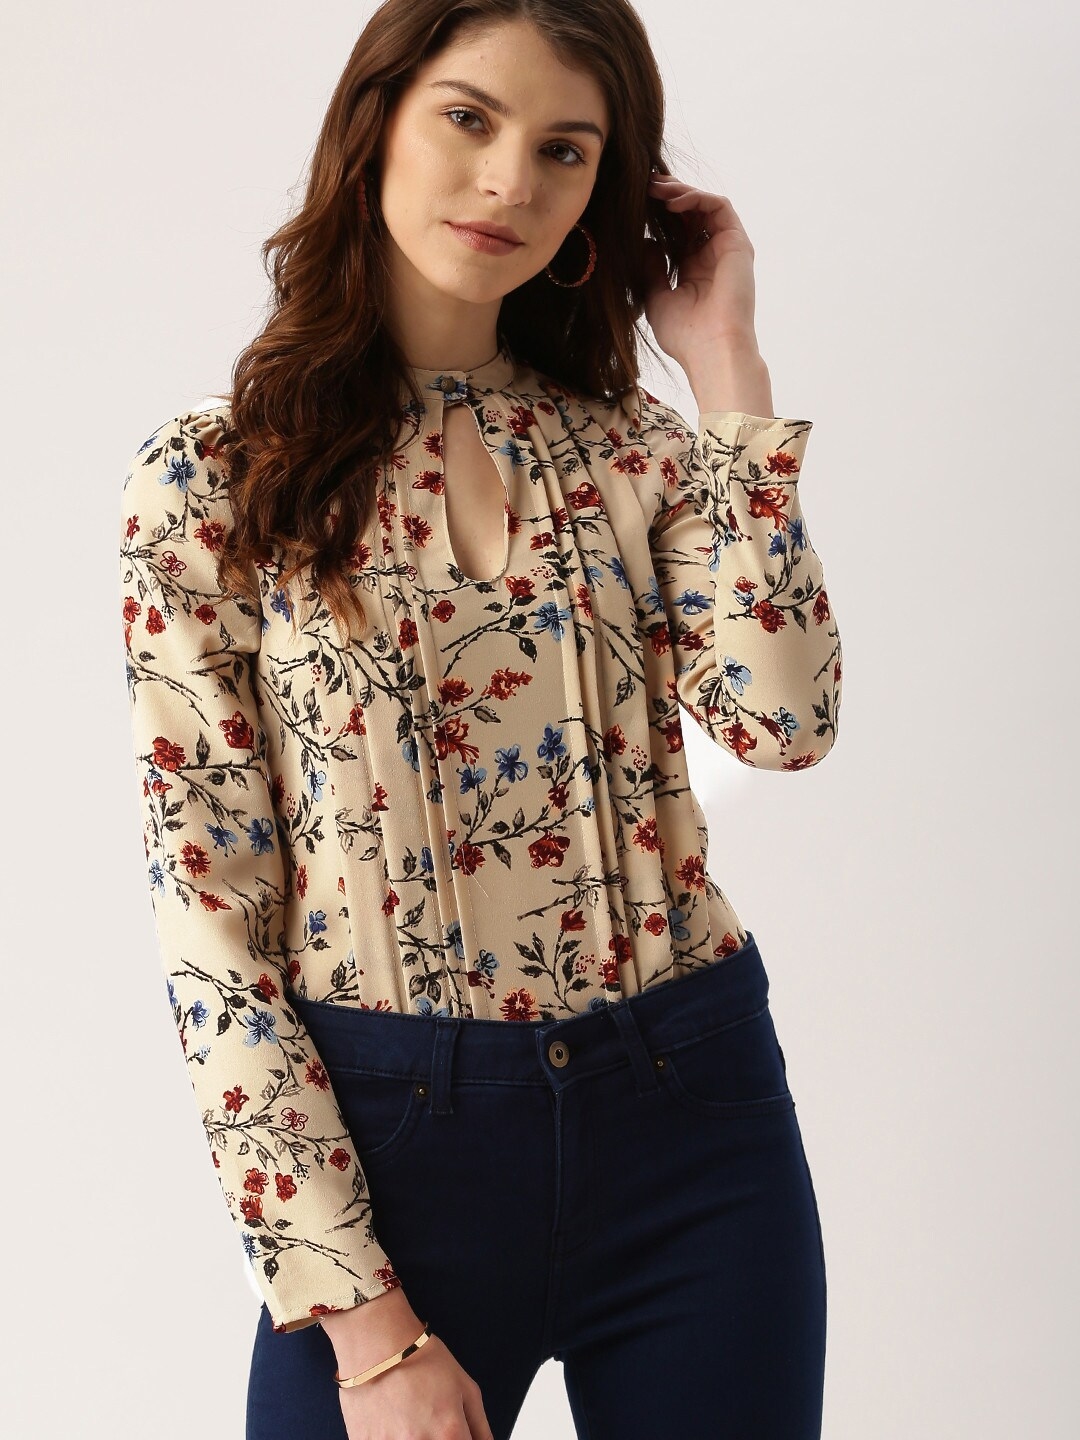 Floral tops for women